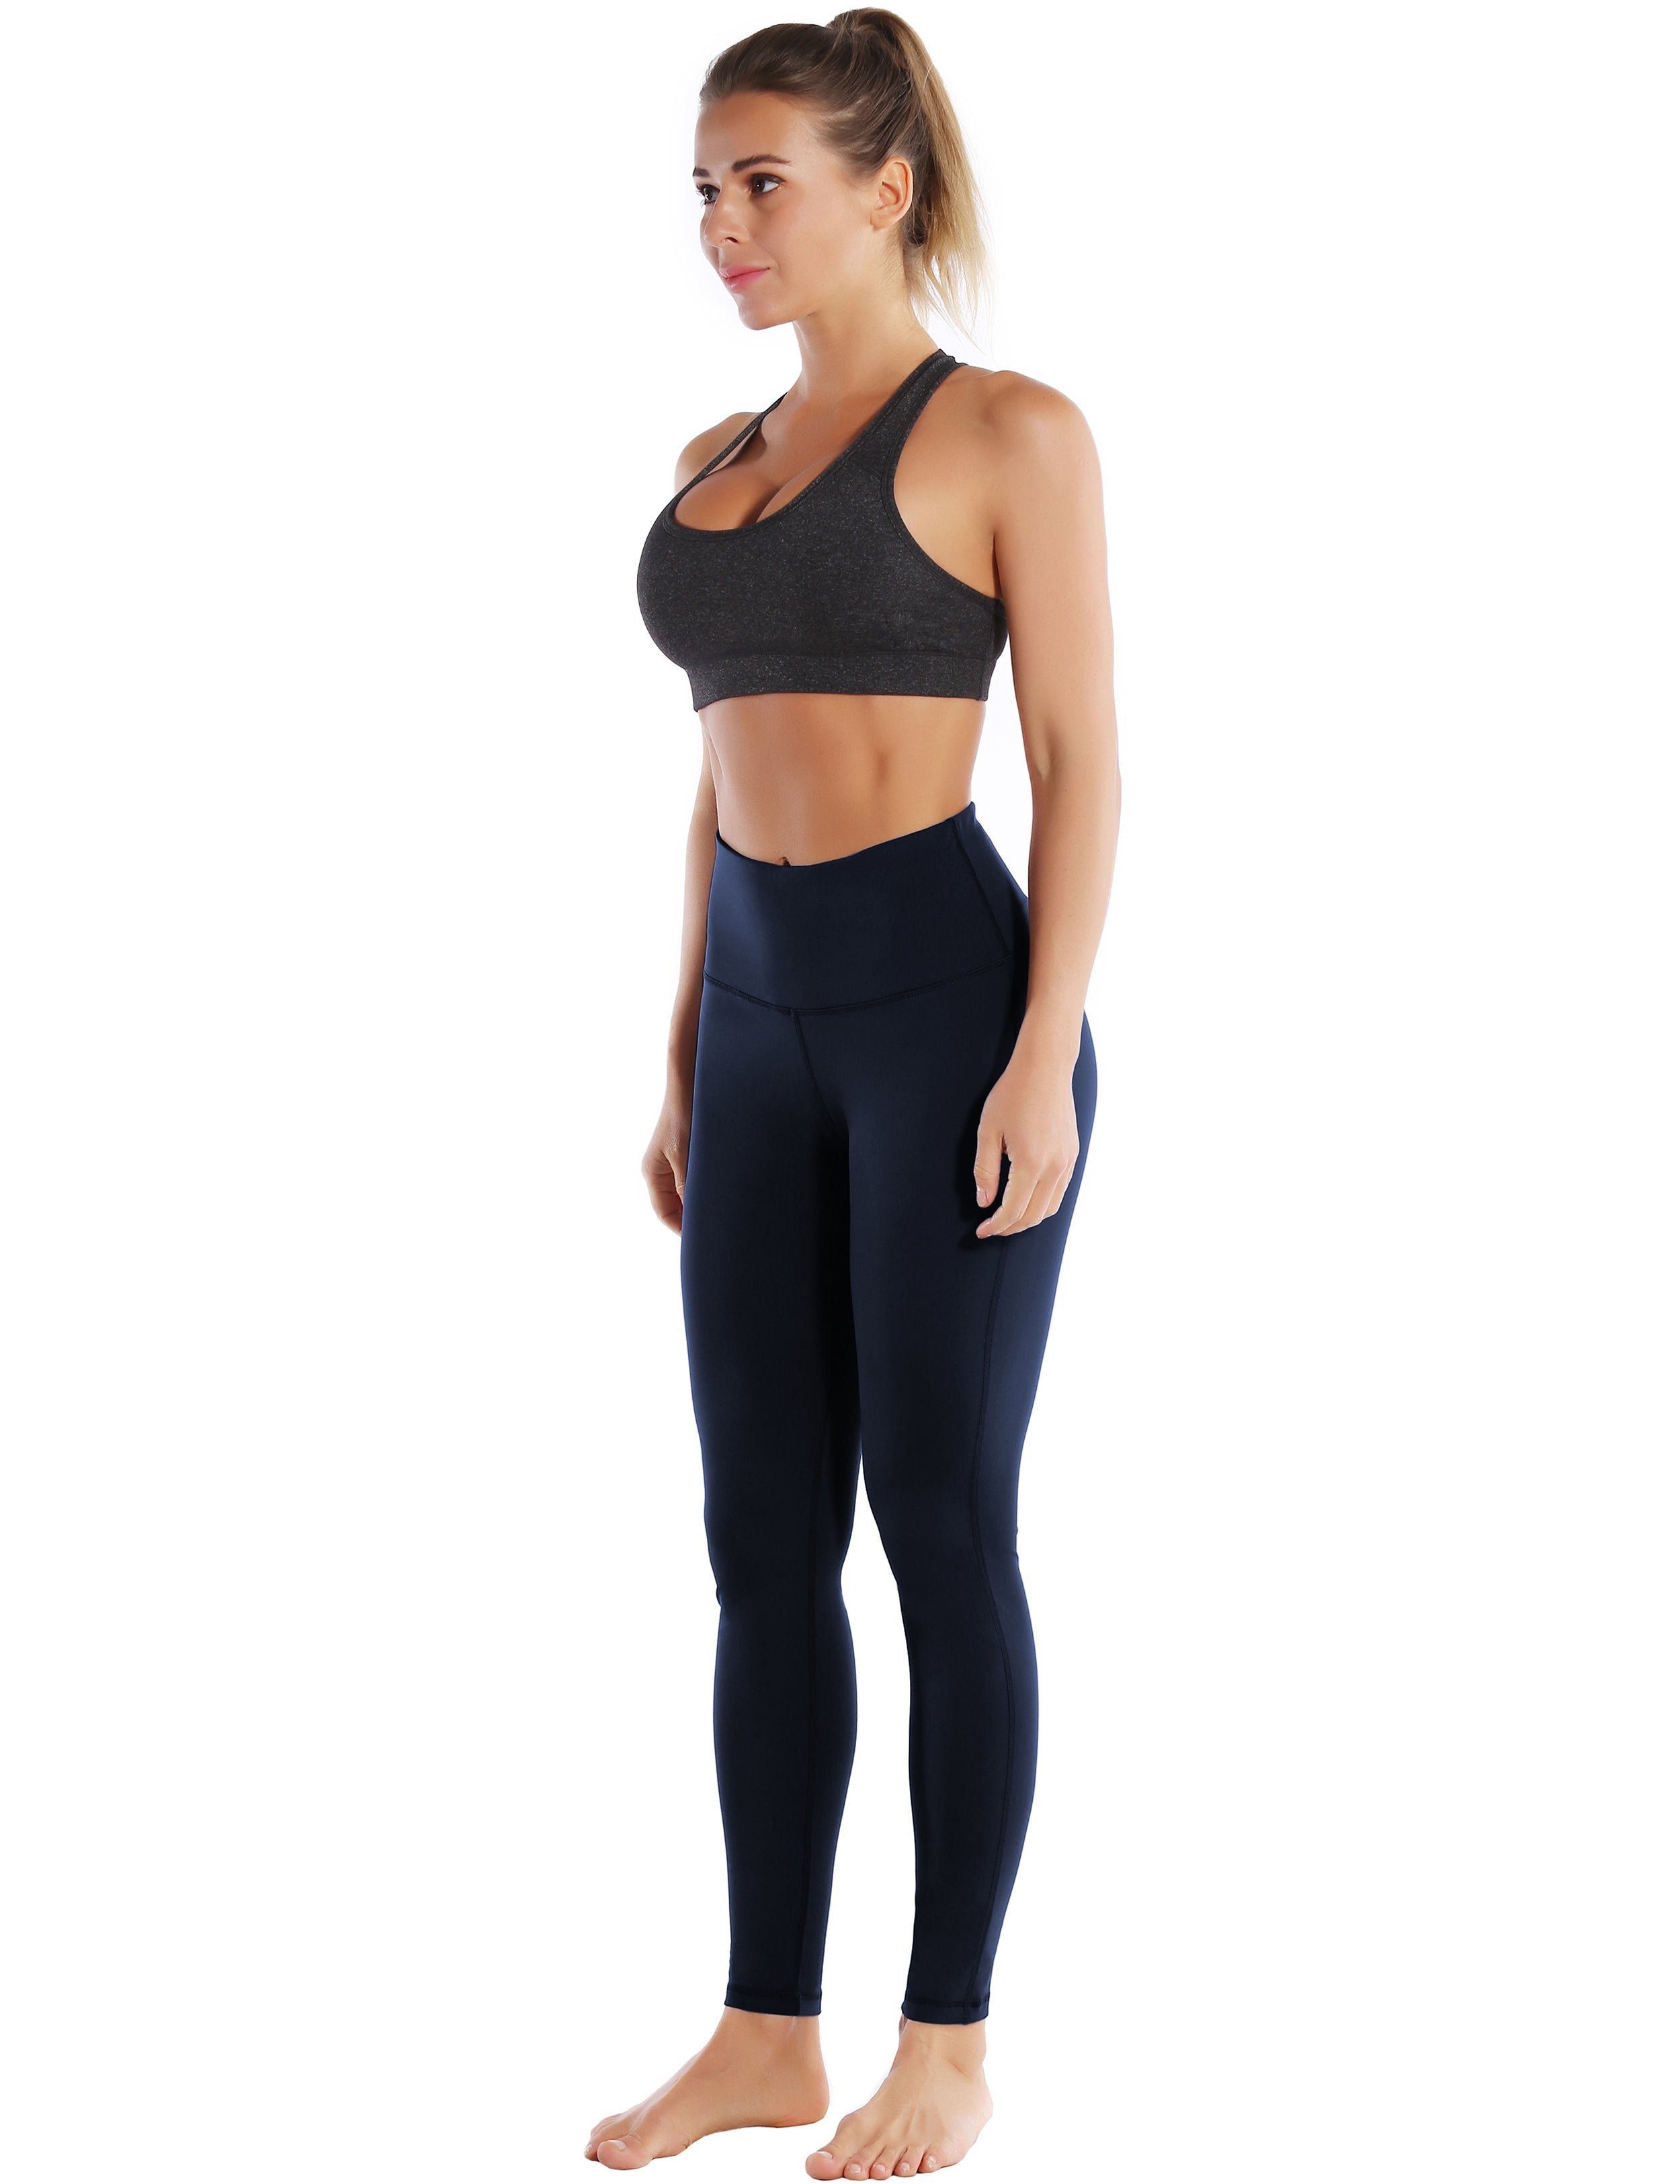 High Waist Side Line Gym Pants darknavy Side Line is Make Your Legs Look Longer and Thinner 75%Nylon/25%Spandex Fabric doesn't attract lint easily 4-way stretch No see-through Moisture-wicking Tummy control Inner pocket Two lengths